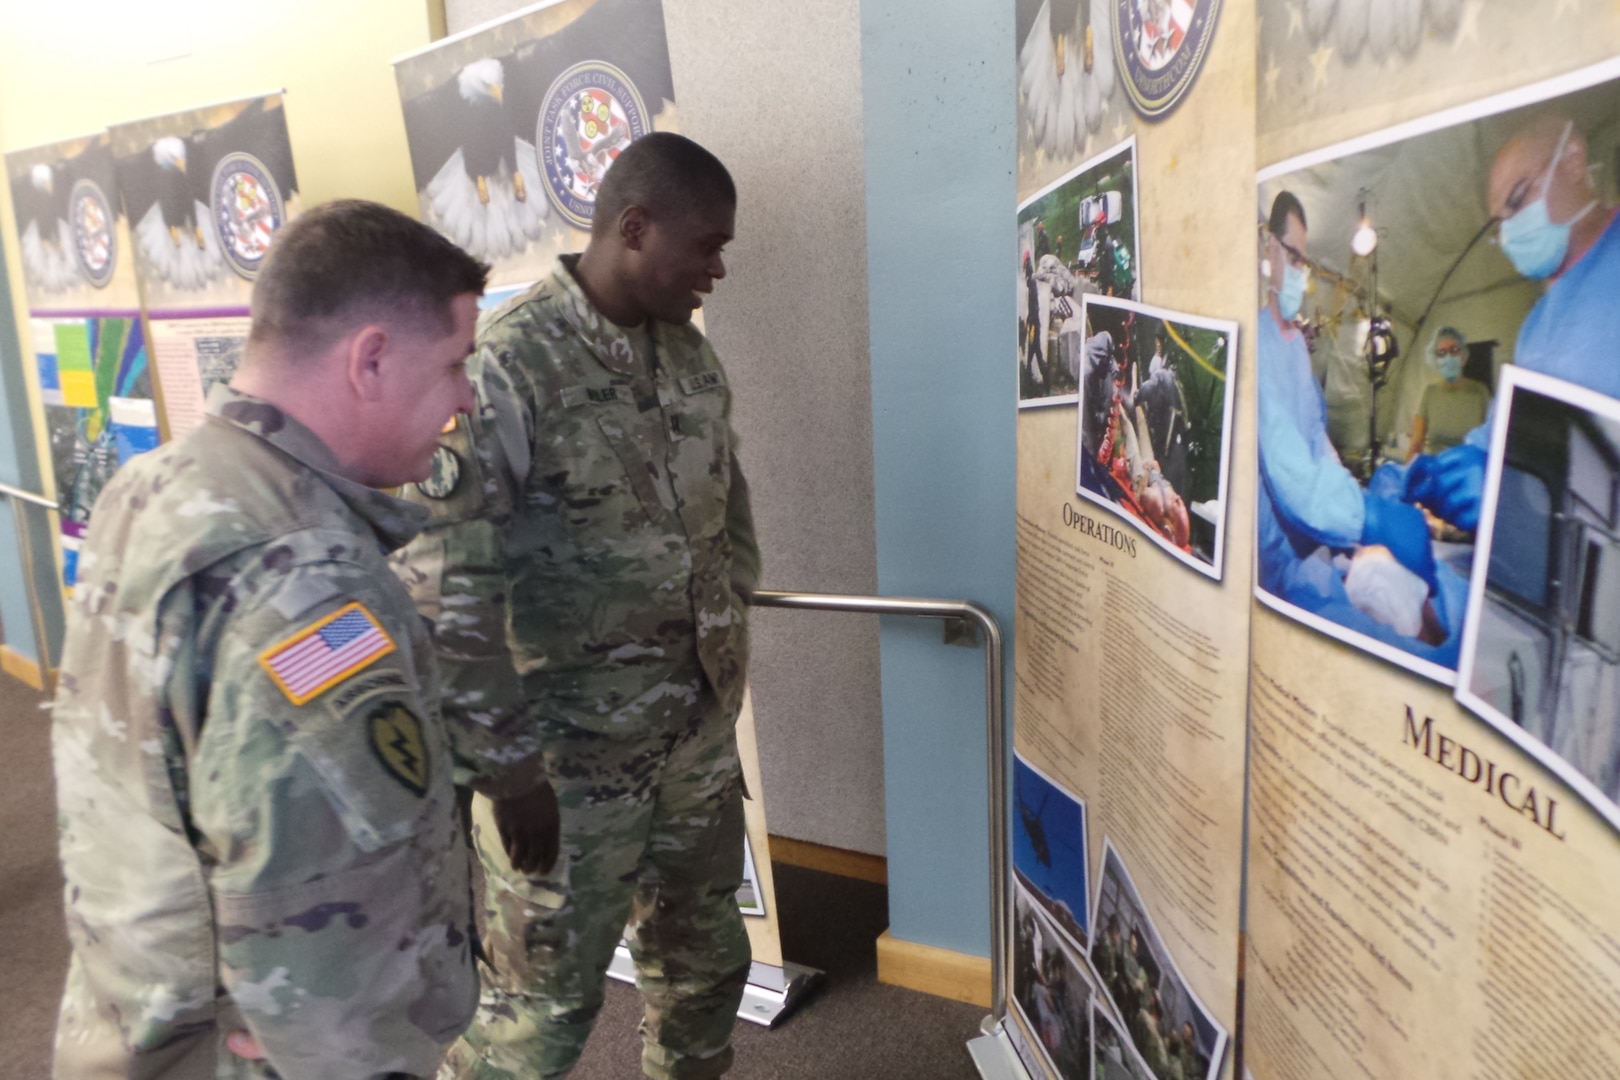 Service members attending the Mobile Training Team (MTT) at Joint Base Lewis-McChord, Wash. read an information display about Joint Task Force Civil Support (JTF-CS) and its mission. The MTT focused on the CBRN mission and DSCA. The briefings are designed to train oncoming DCRF units on specific mission requirements in the event of a CBRN response. (Official DoD photo by Mass Communication Specialist 3rd Class Michael Redd/RELEASED)